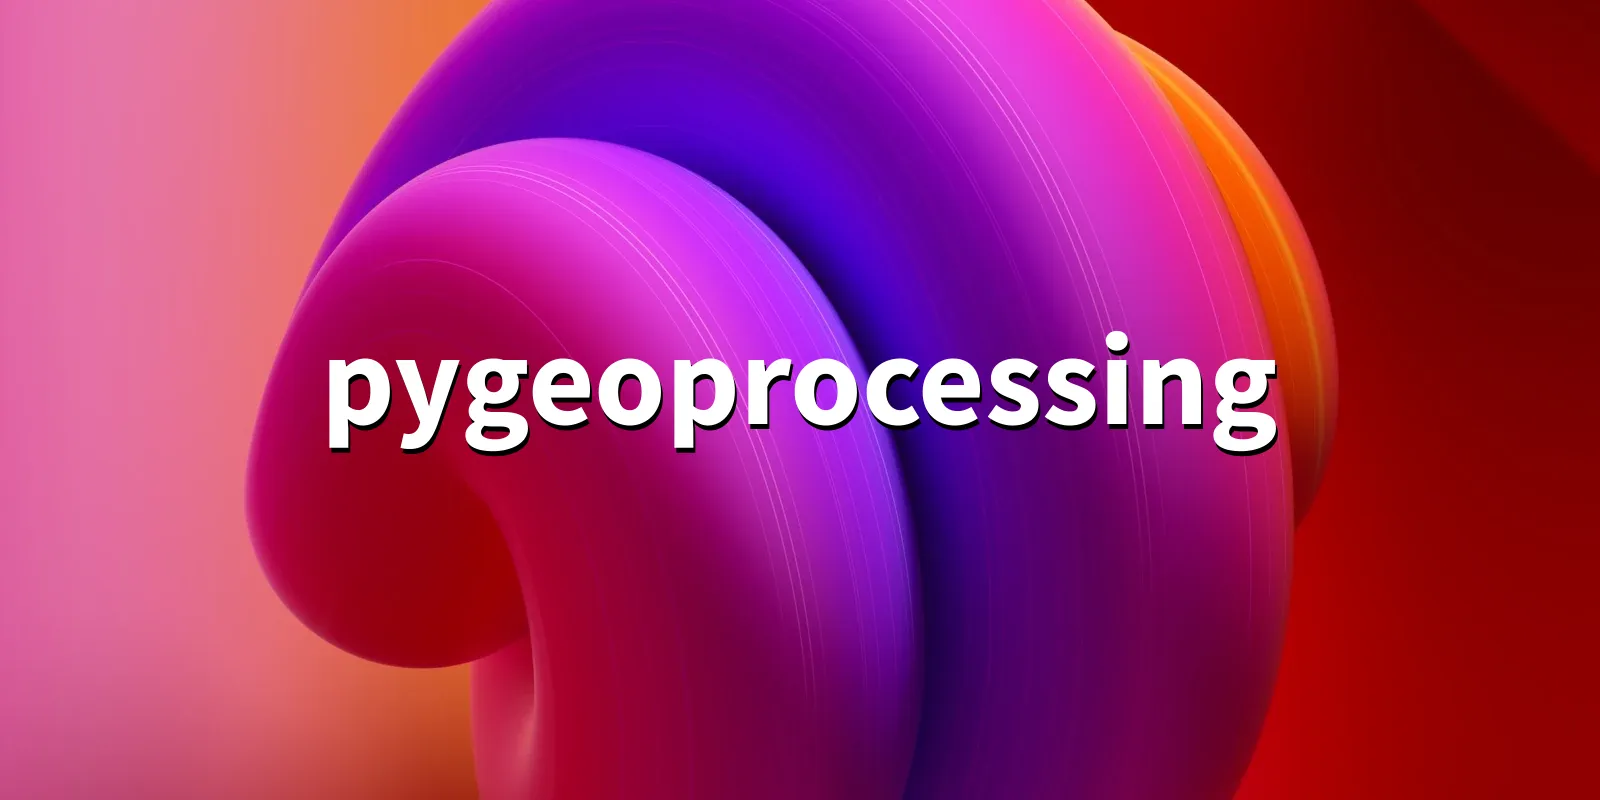 /pkg/p/pygeoprocessing/pygeoprocessing-banner.webp